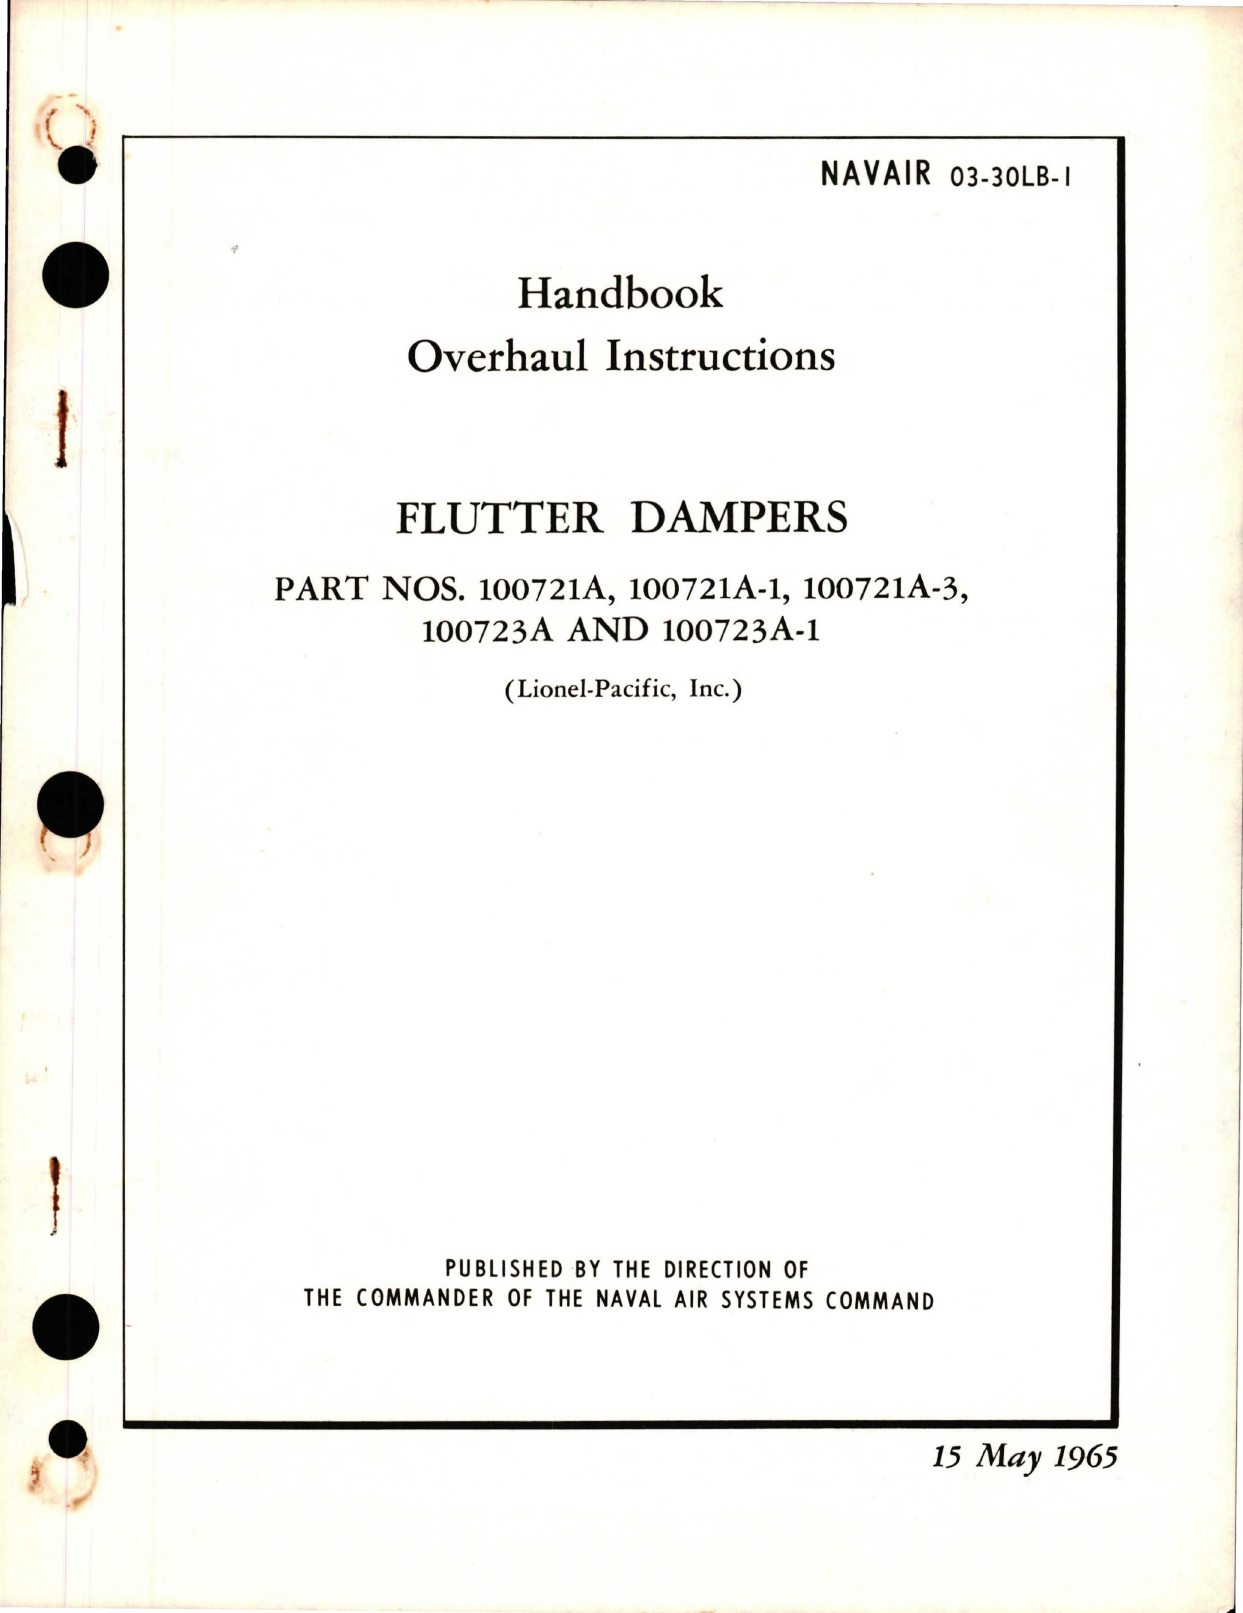 Sample page 1 from AirCorps Library document: Overhaul Instructions for Flutter Dampers - Parts 100721A, 100721A-1, 100721A-3, 100723A & 100723A-1